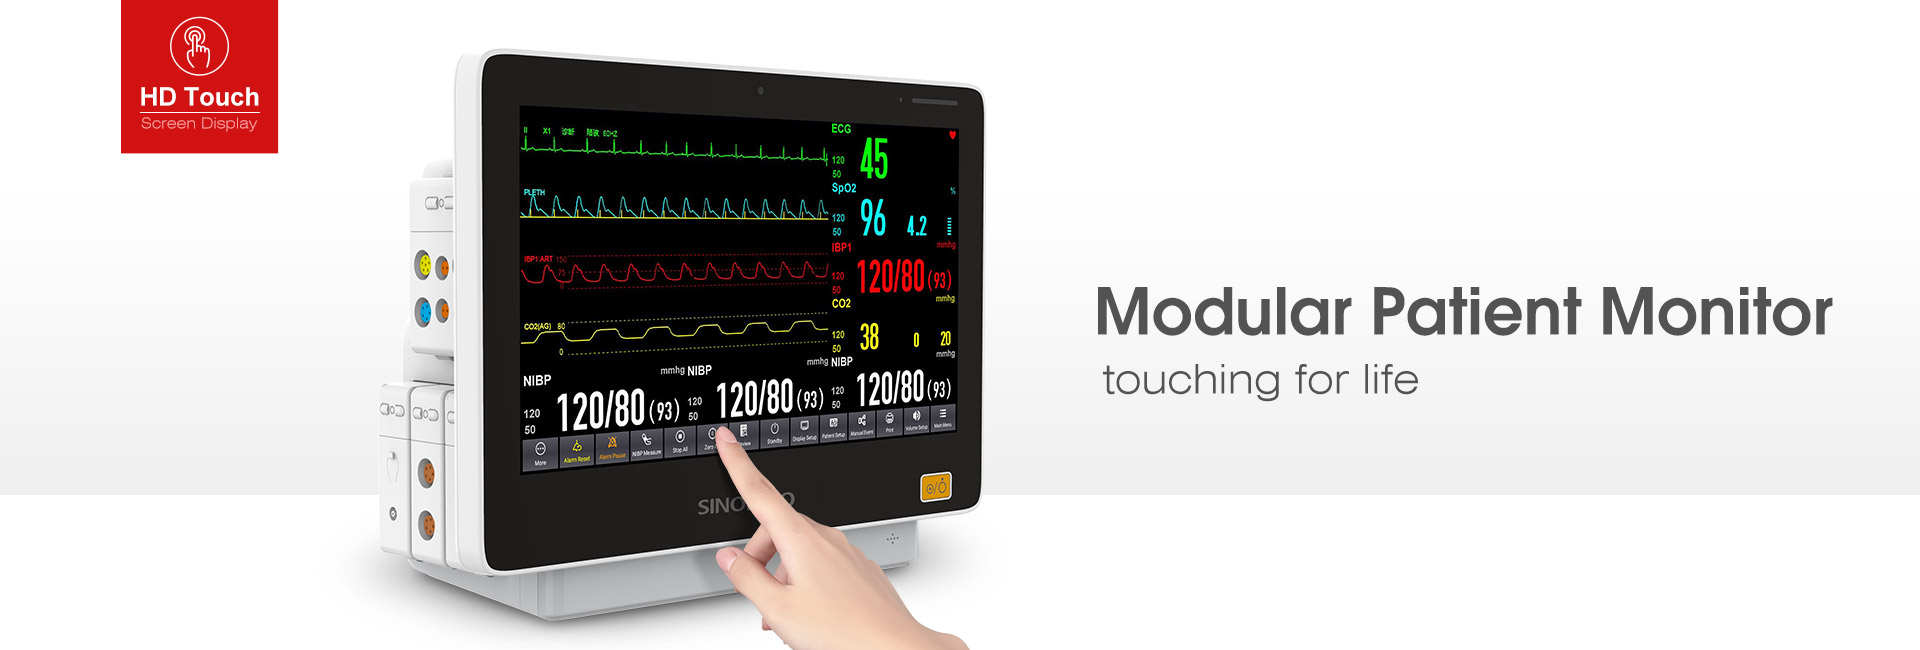 AcuitSign M5 15 Touch Screen Patient Monitor(图2)